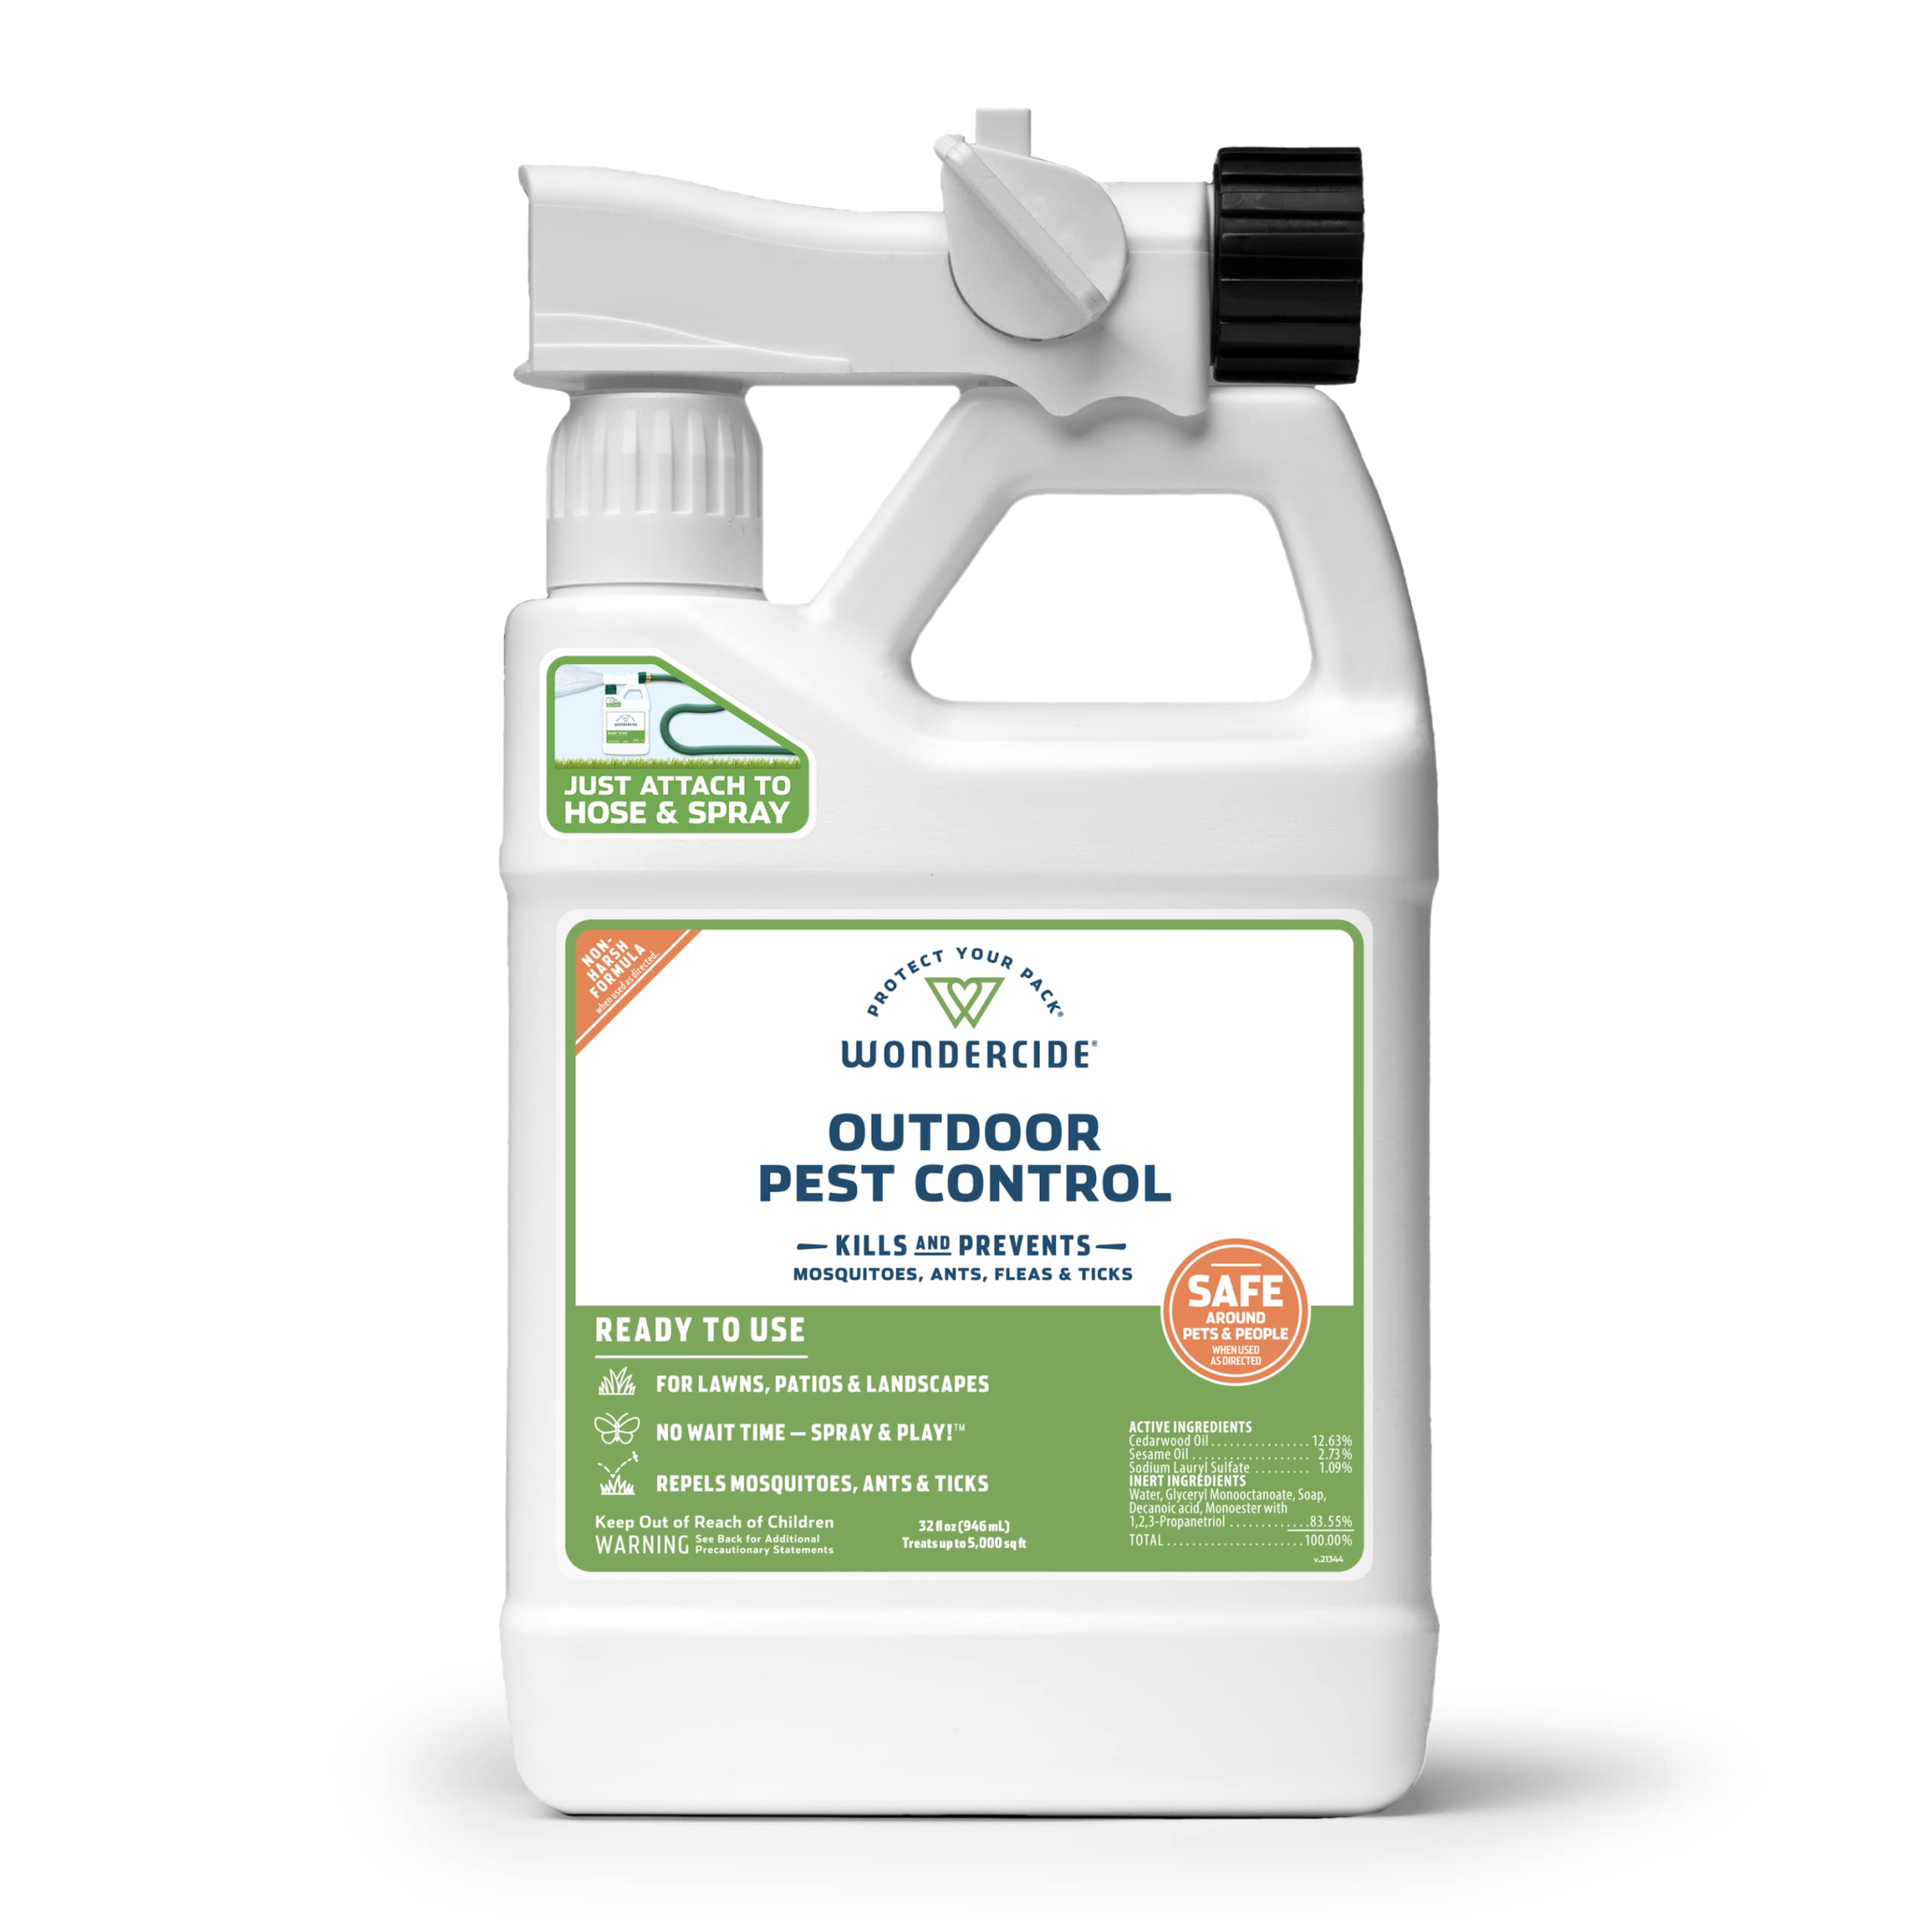 Wondercide - EcoTreat Ready-to-Use Outdoor Pest Control Spray with Natural Essential Oils - Mosquito, Ant, Insect Repellent, Treatment, and Killer - Plant-Based - Safe for Pets , Kids - 32 oz